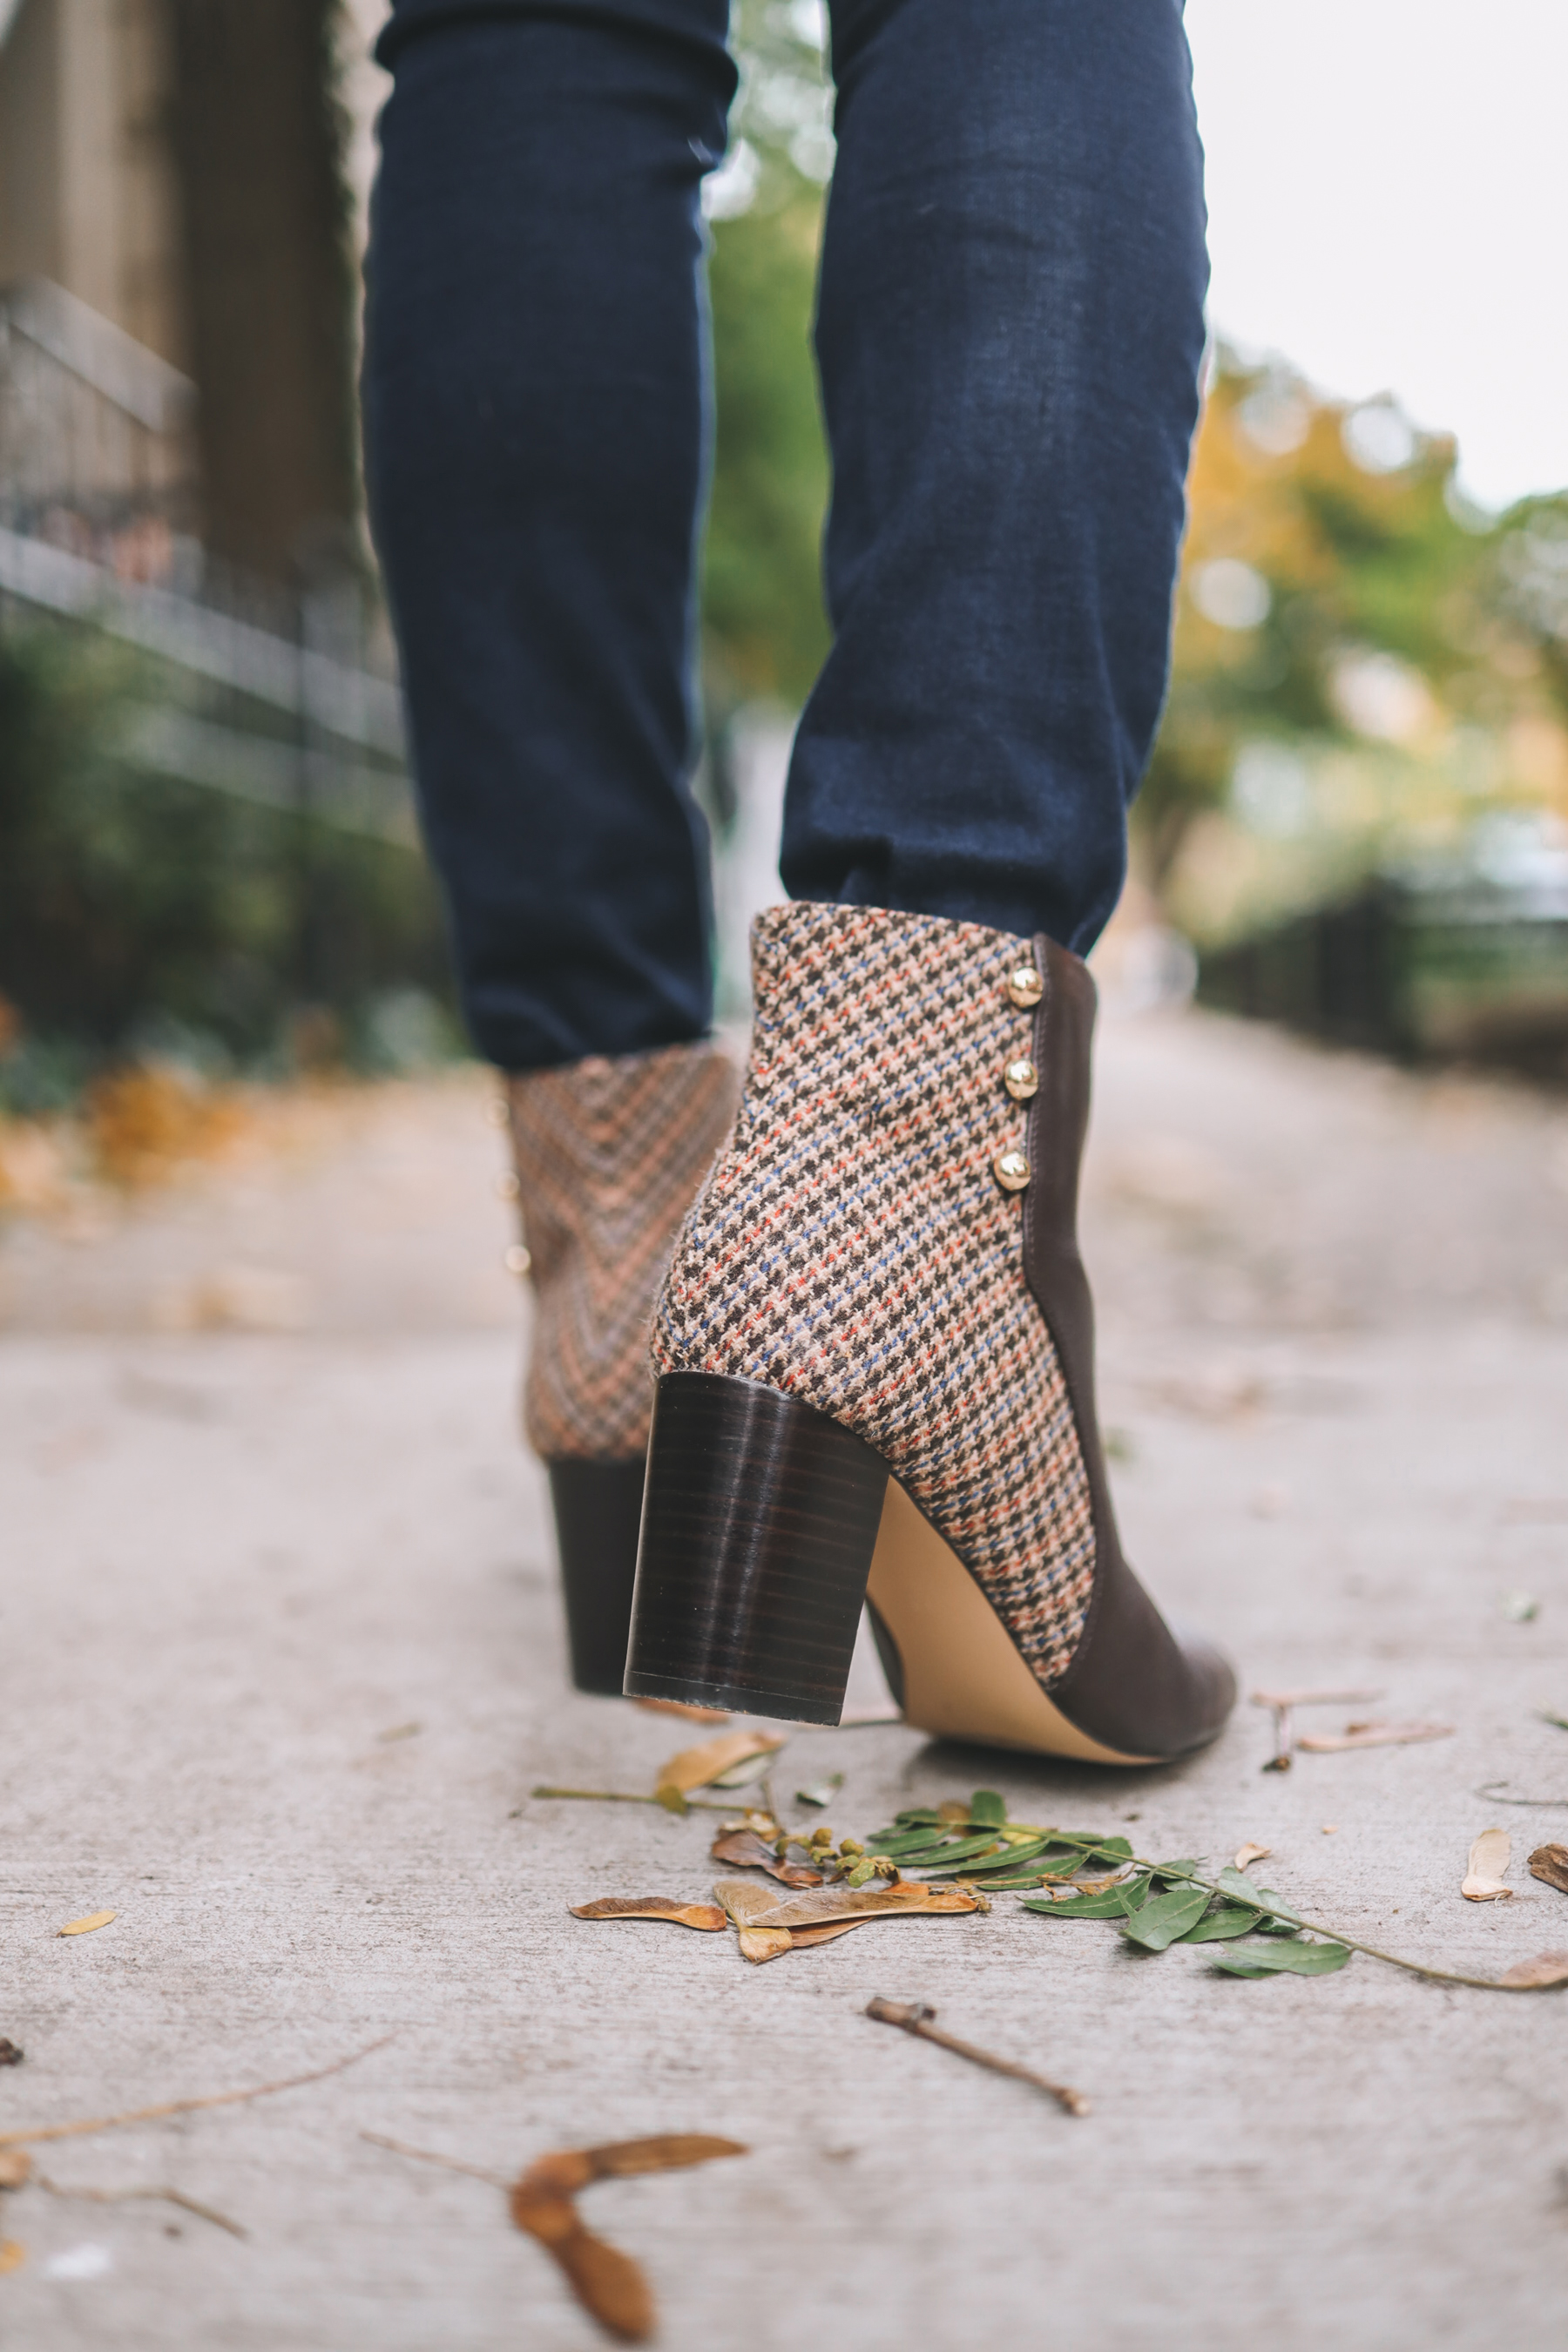 boots for fall